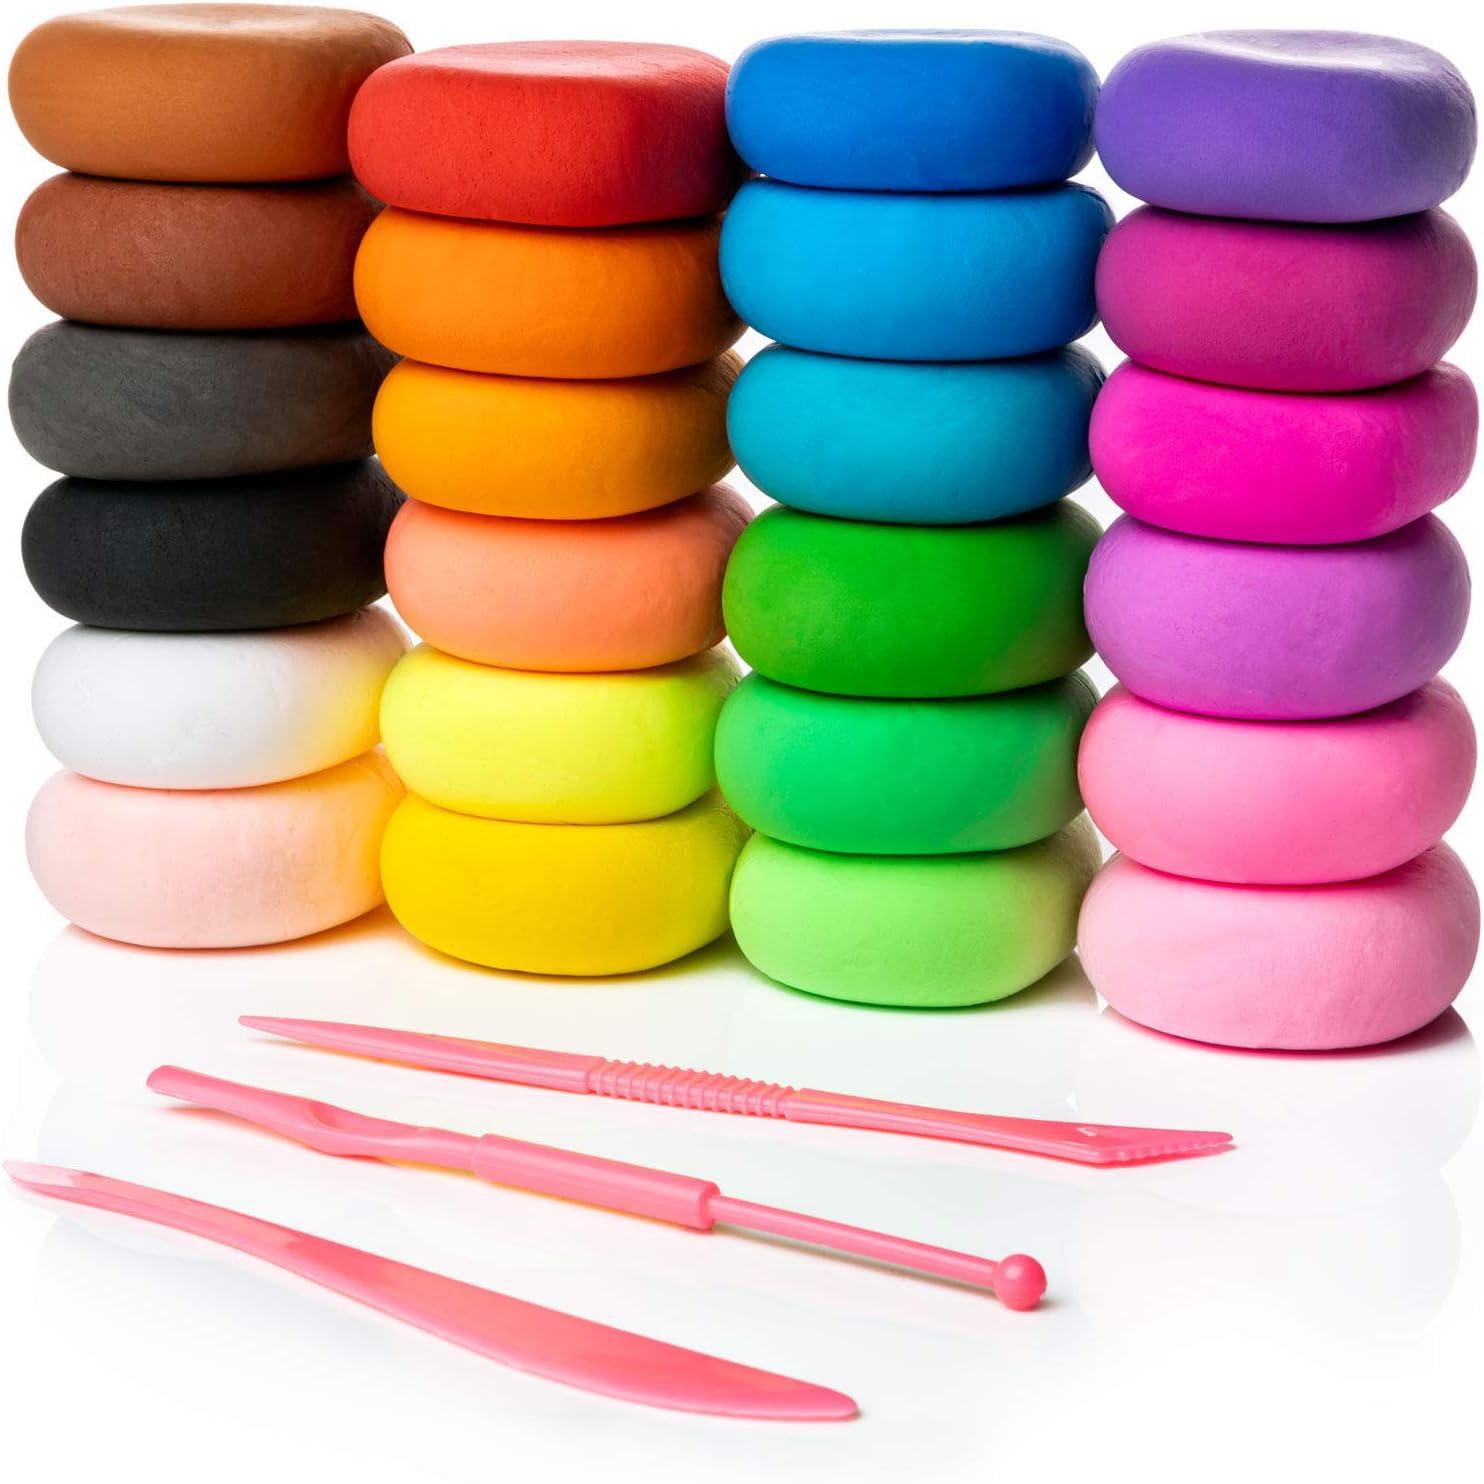 24 Colors Air Dry Clay For Kids With 8 Modelling Clay Tools